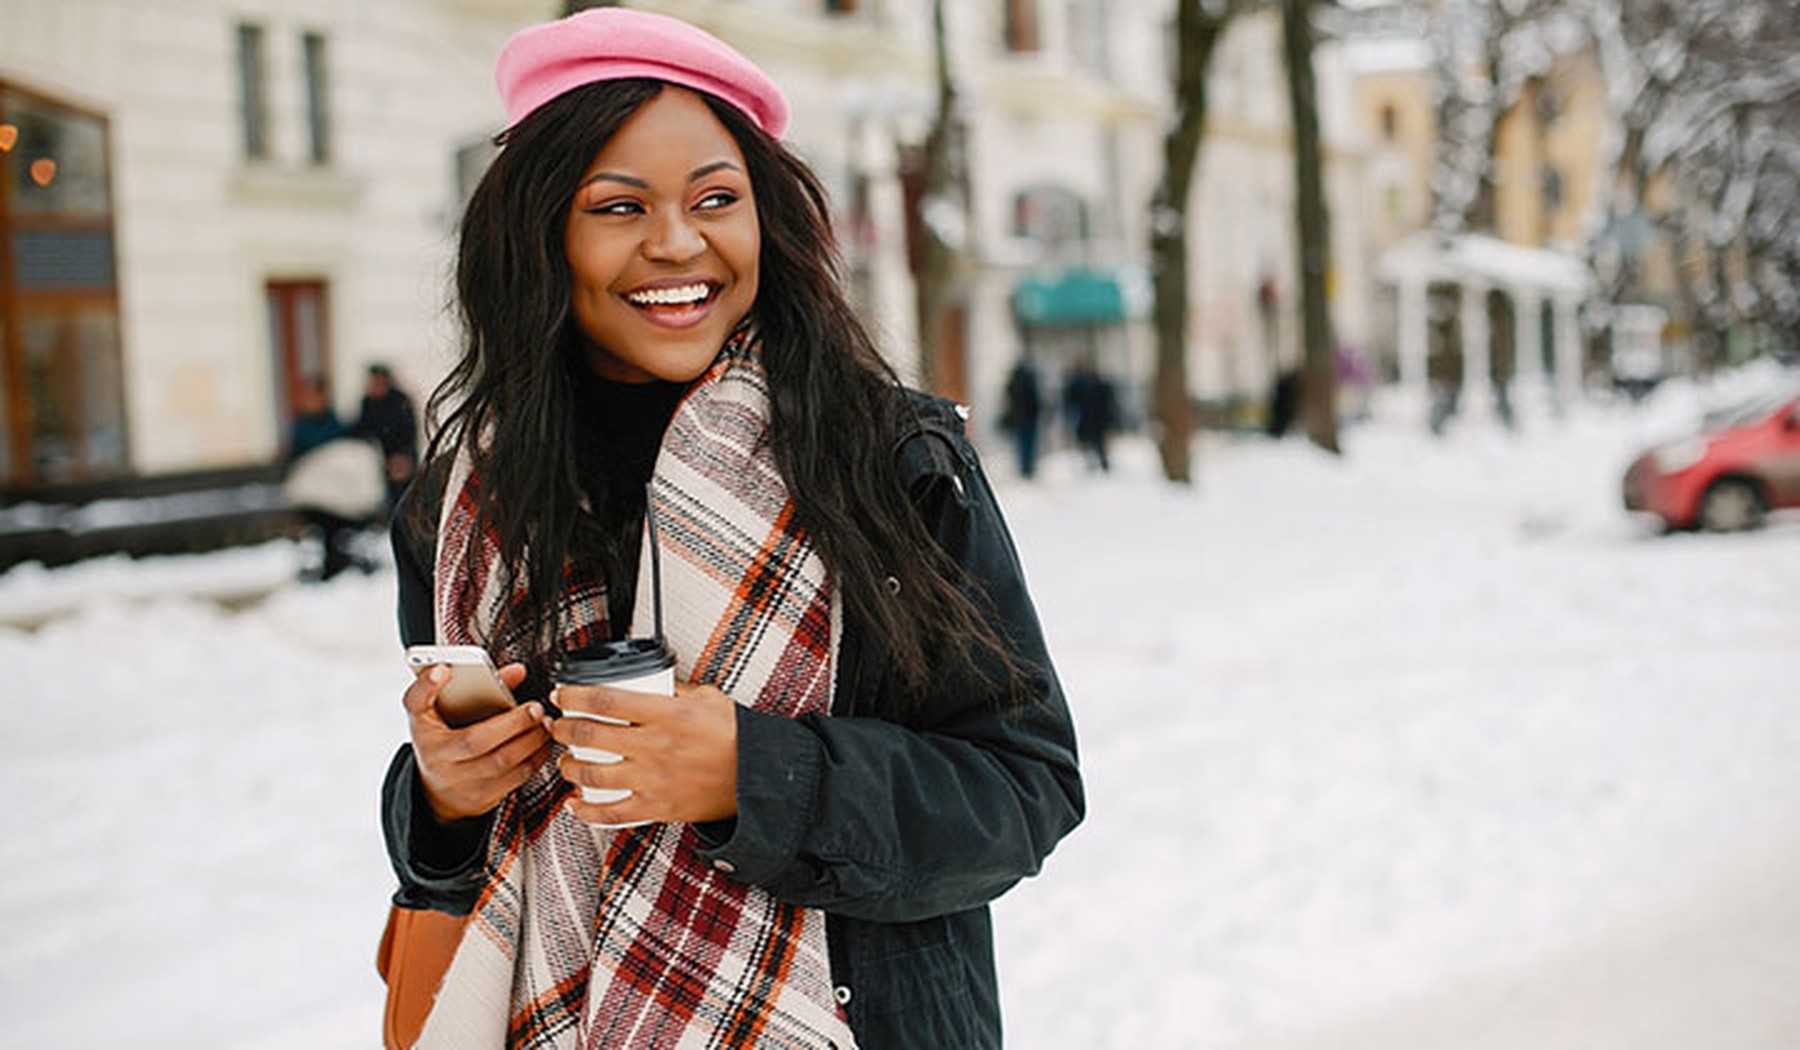 Smiling young woman in a pink hat and plaid scarf